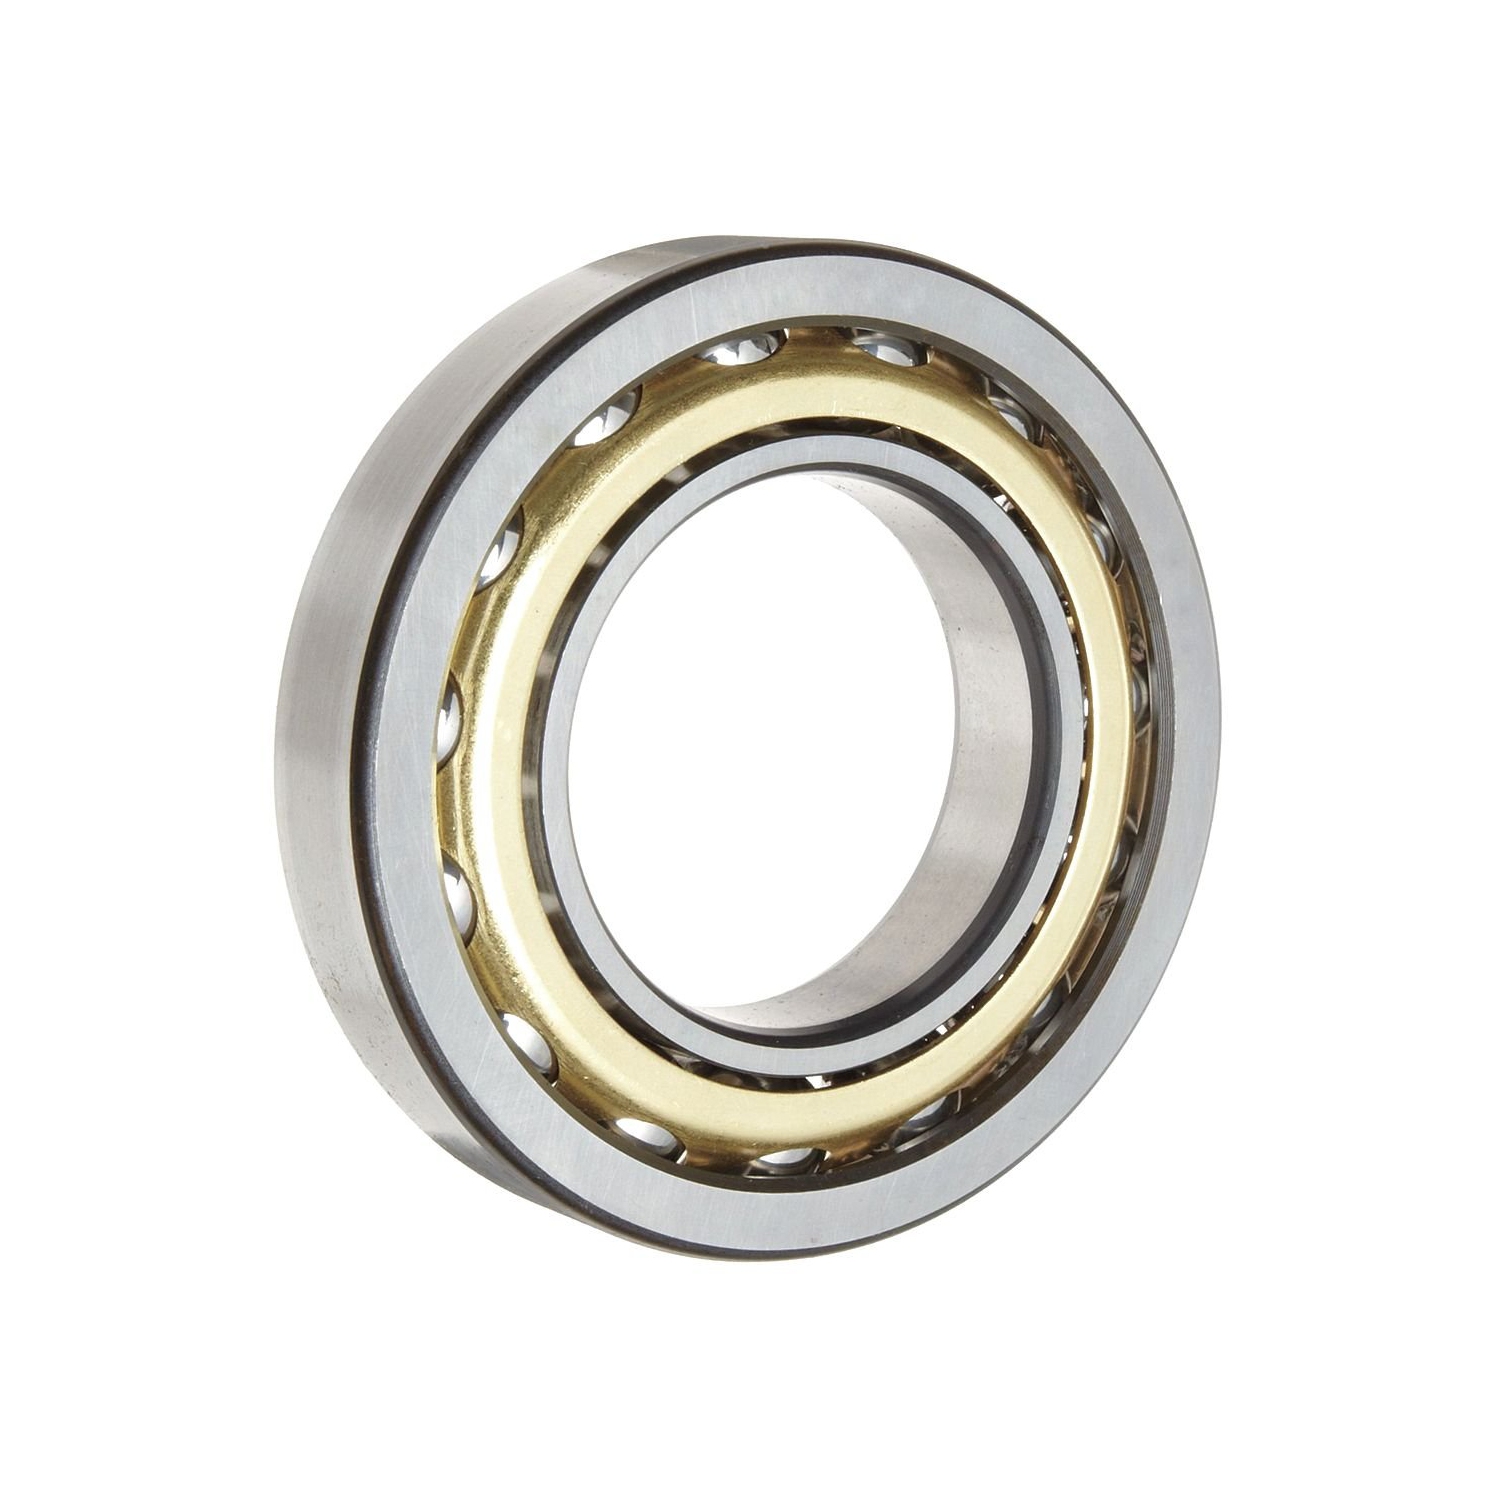 SKF 7219 BECBM Light Series Angular Contact Ball Bearing, Universal Mounting, ABEC 1 Precision, 40 Contact Angle, Open, Brass Cage, Normal Clearance, 95mm Bore